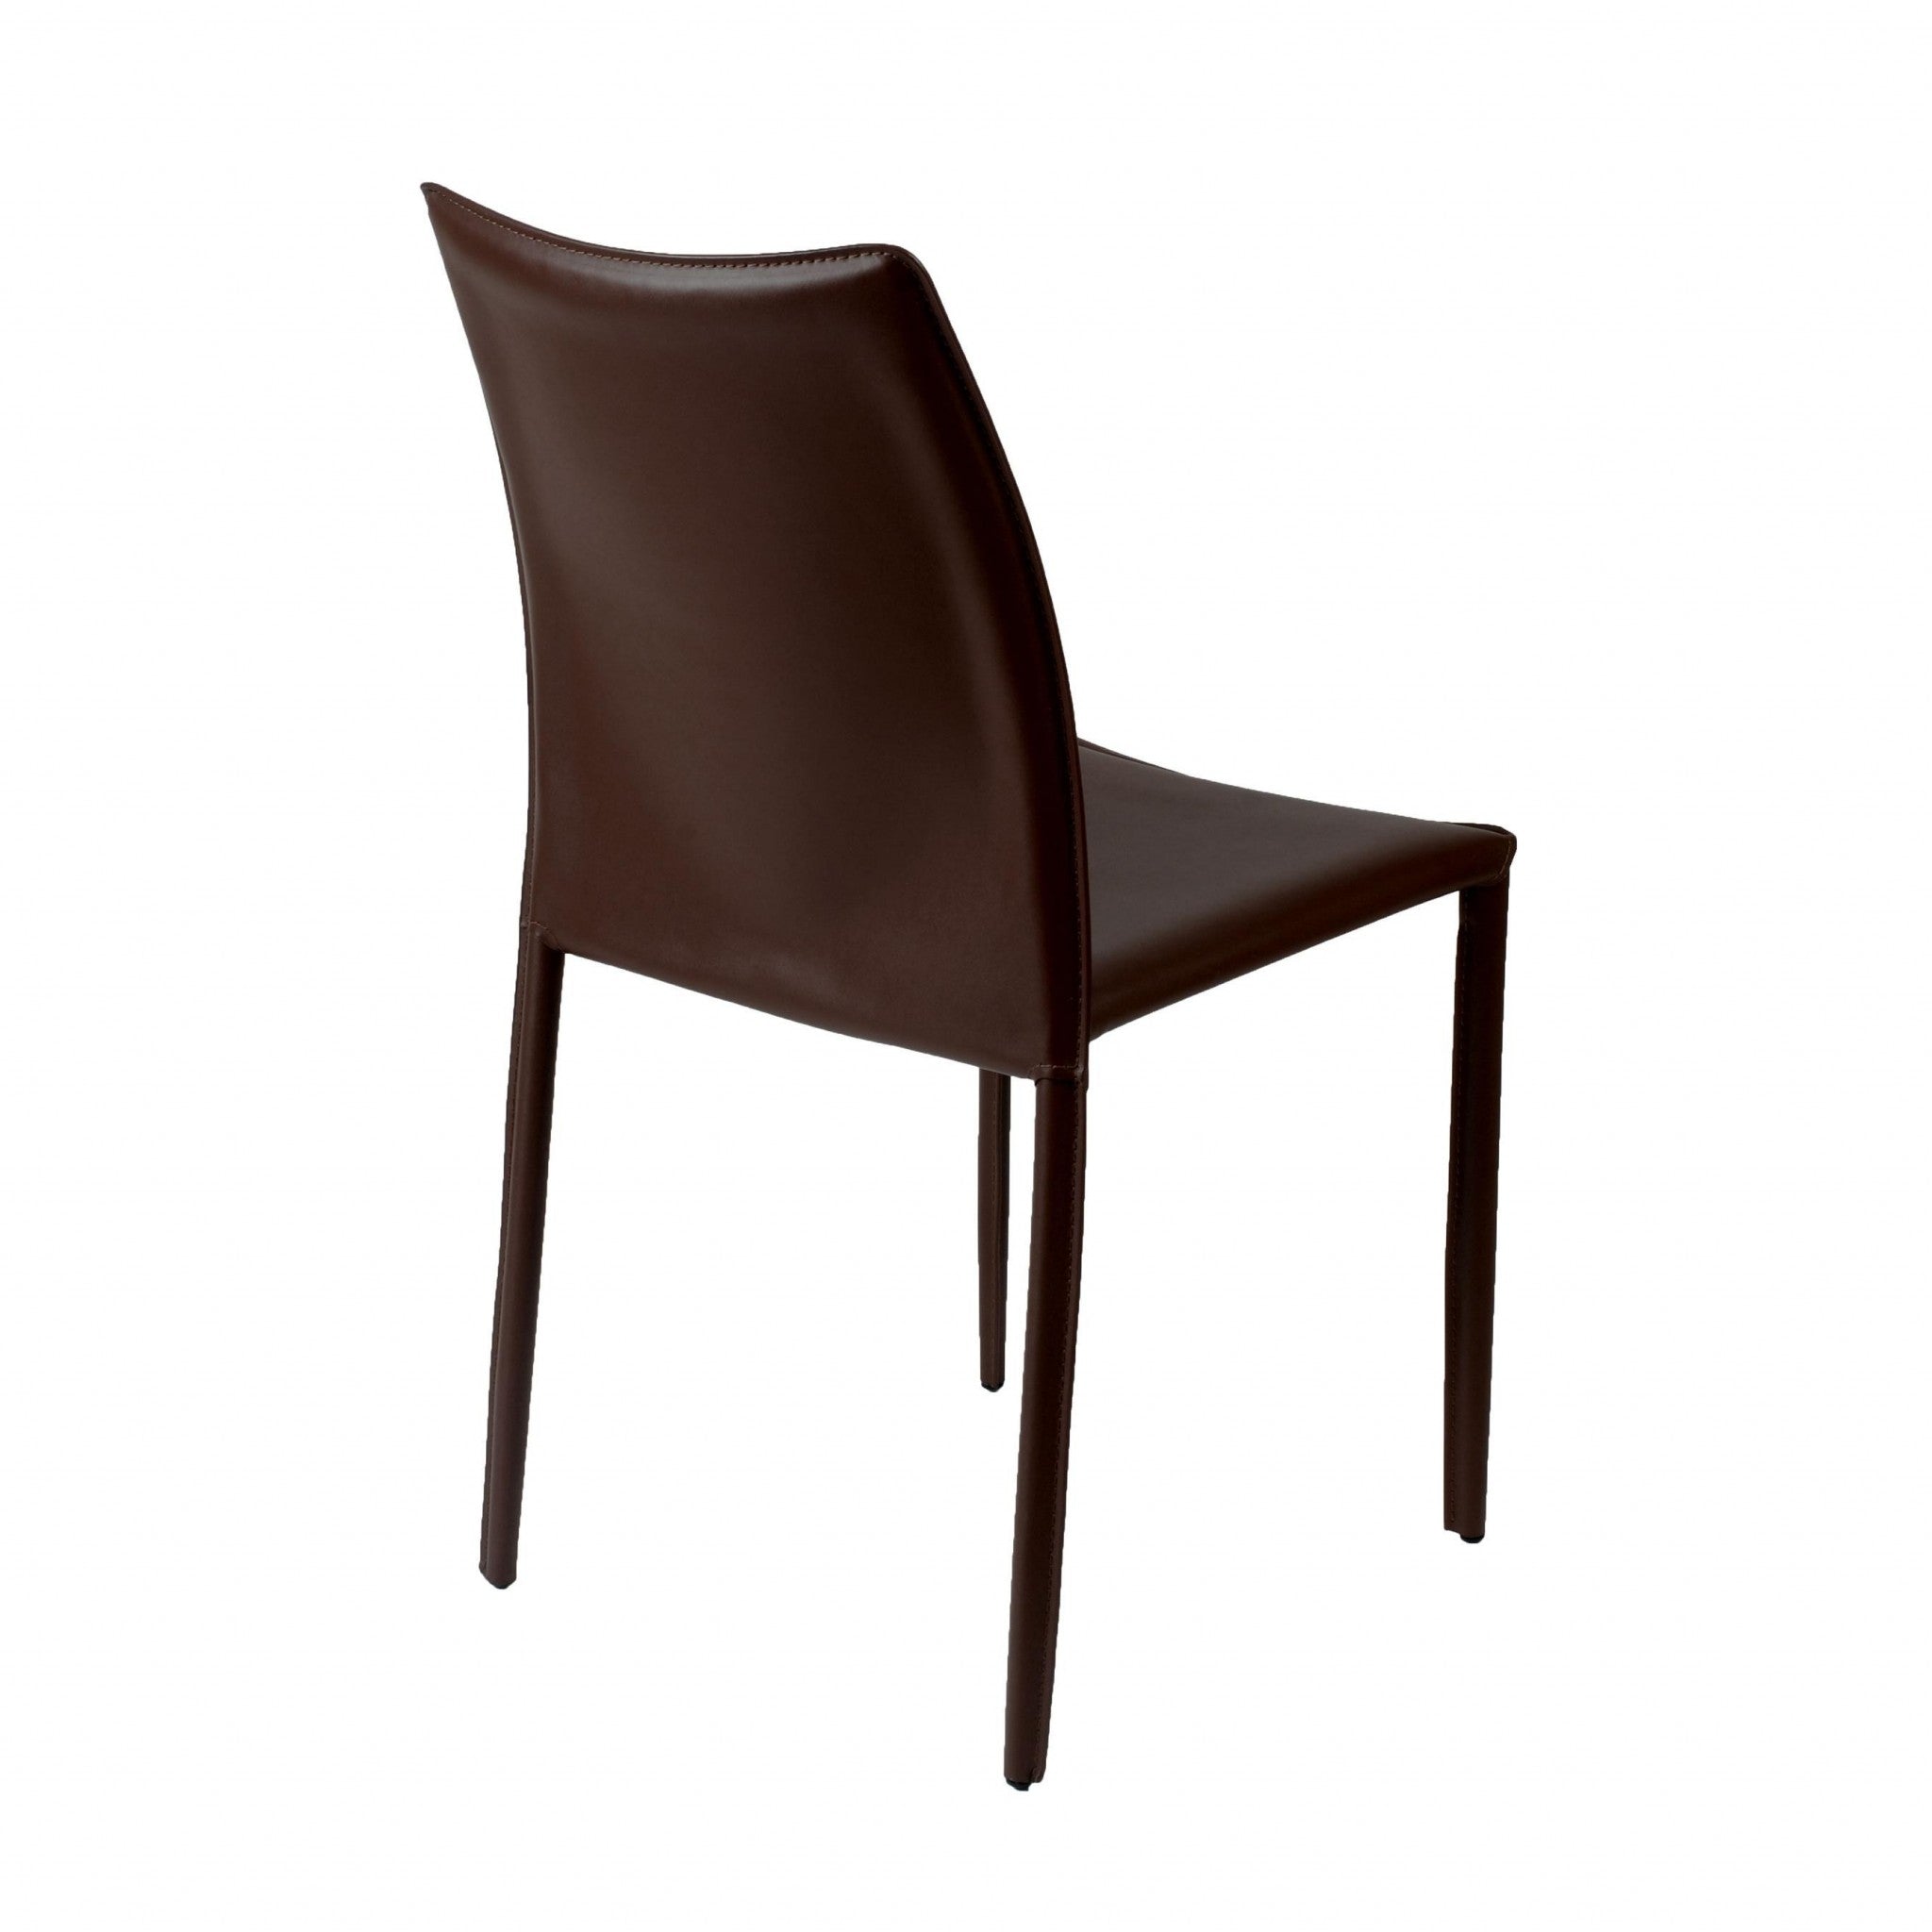 Set of Two All Dark Brown Stacking Chairs